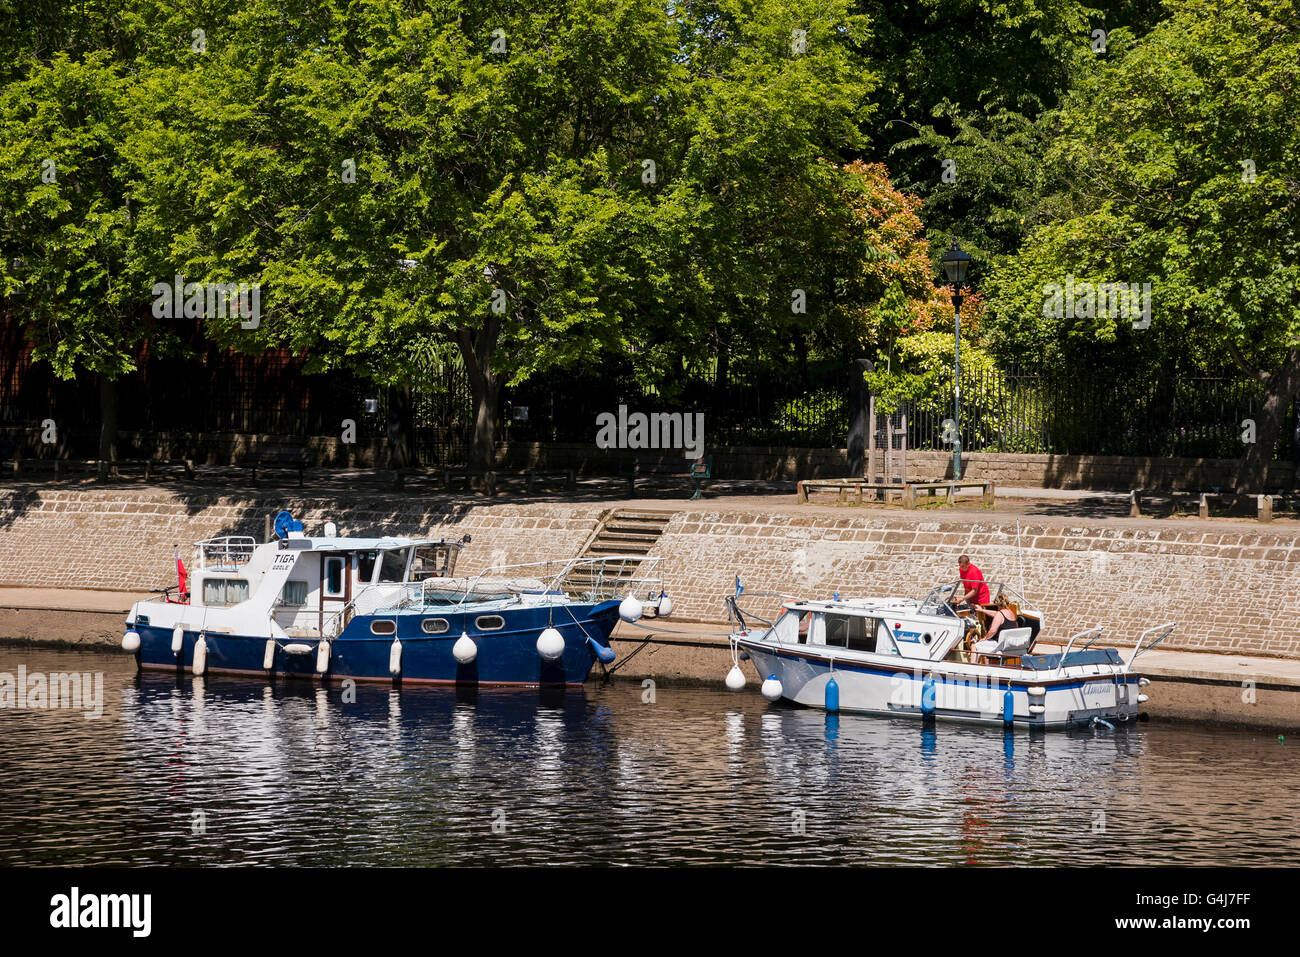 Couple aboard one of 2 river cruiser boats moored on the banks of the River Ouse, York, North Yorkshire, GB, on a sunny day. Stock Photo